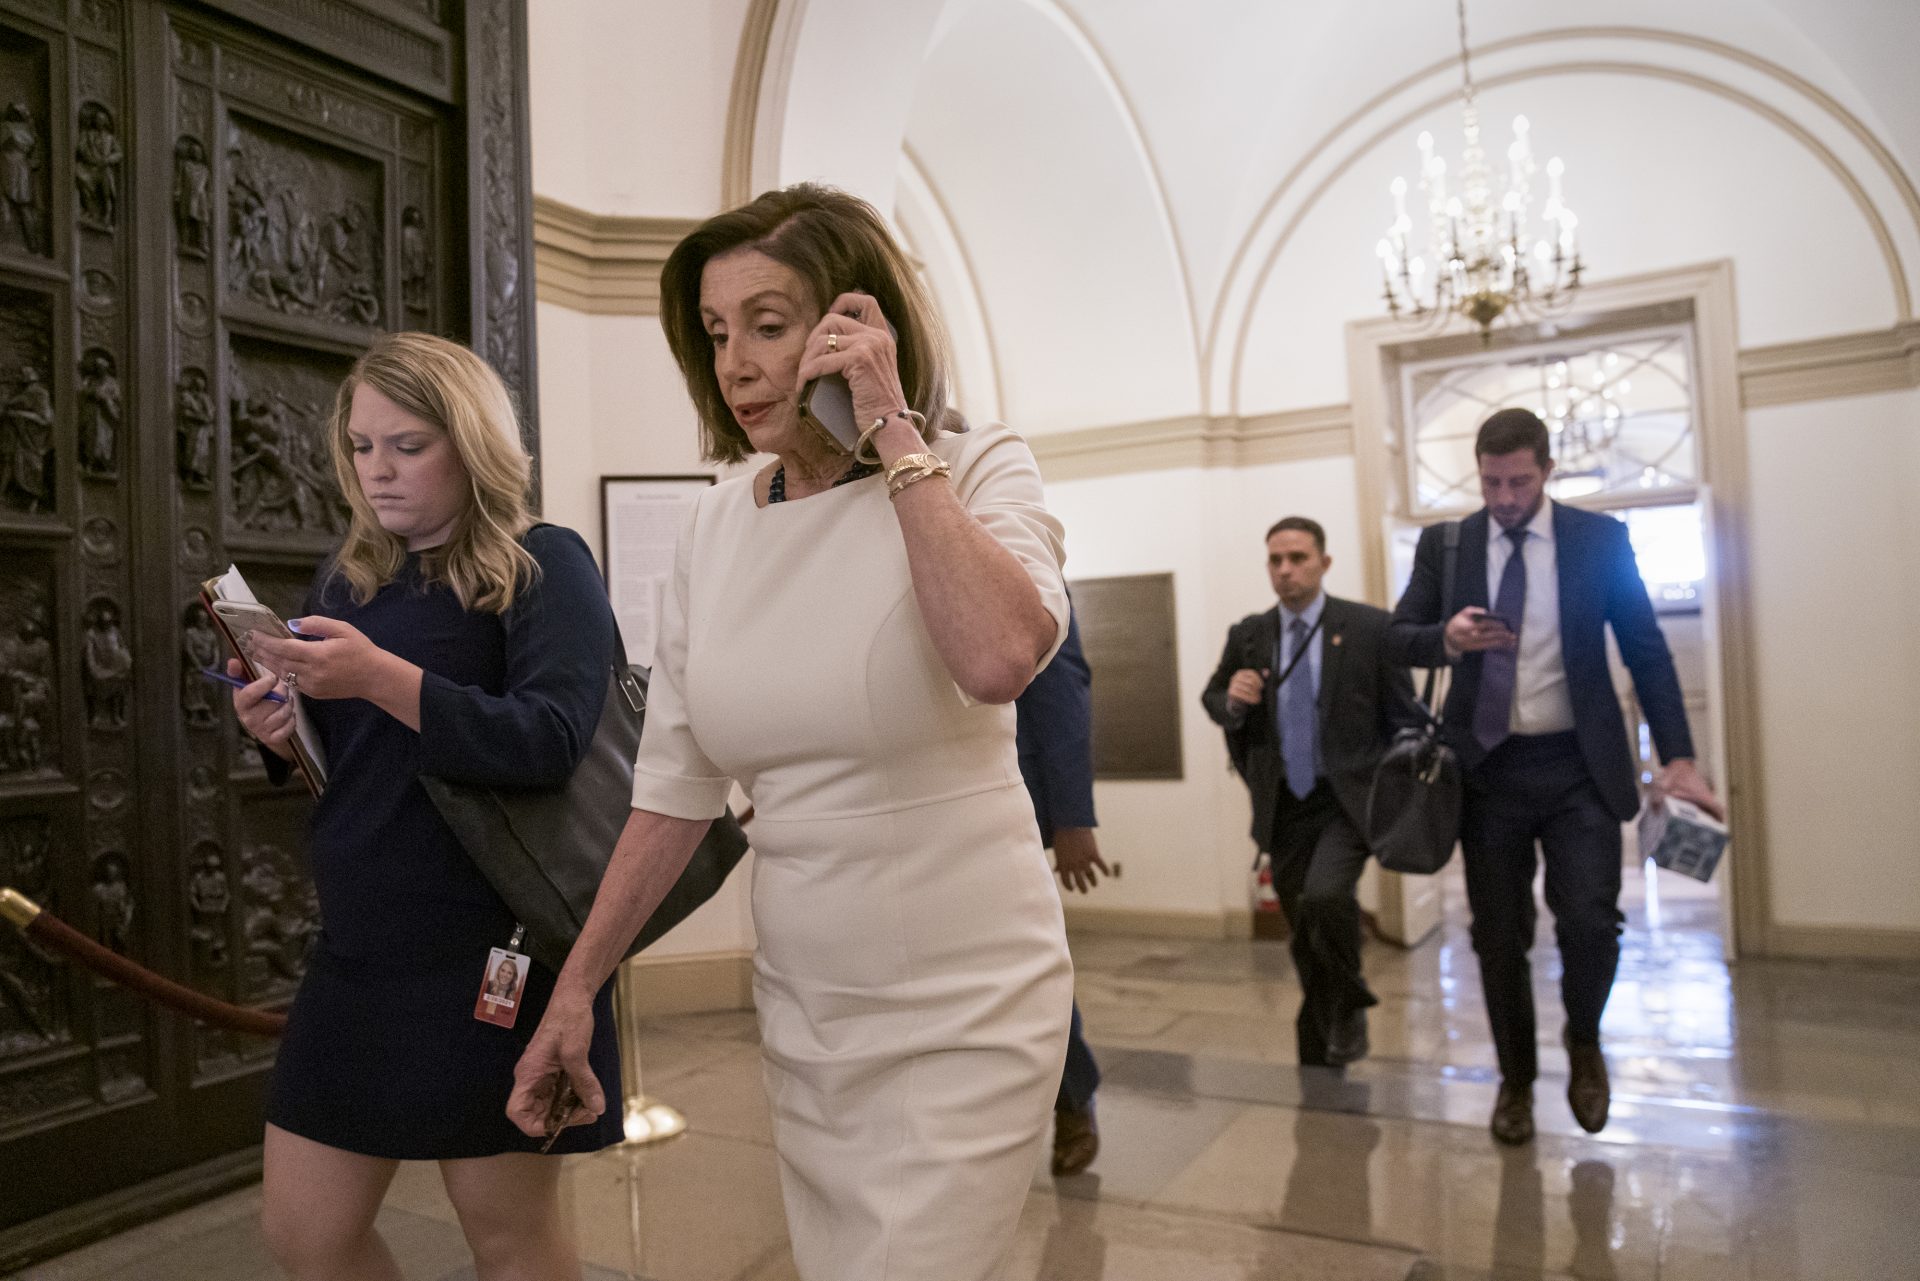 Speaker of the House Nancy Pelosi, D-Calif., arrives at the Capitol in Washington, Thursday, Sept. 26, 2019, just as Acting Director of National Intelligence Joseph Maguire is set to speak publicly for the first time about a secret whistleblower complaint involving President Donald Trump. Pelosi committed Tuesday to launching a formal impeachment inquiry against Trump.